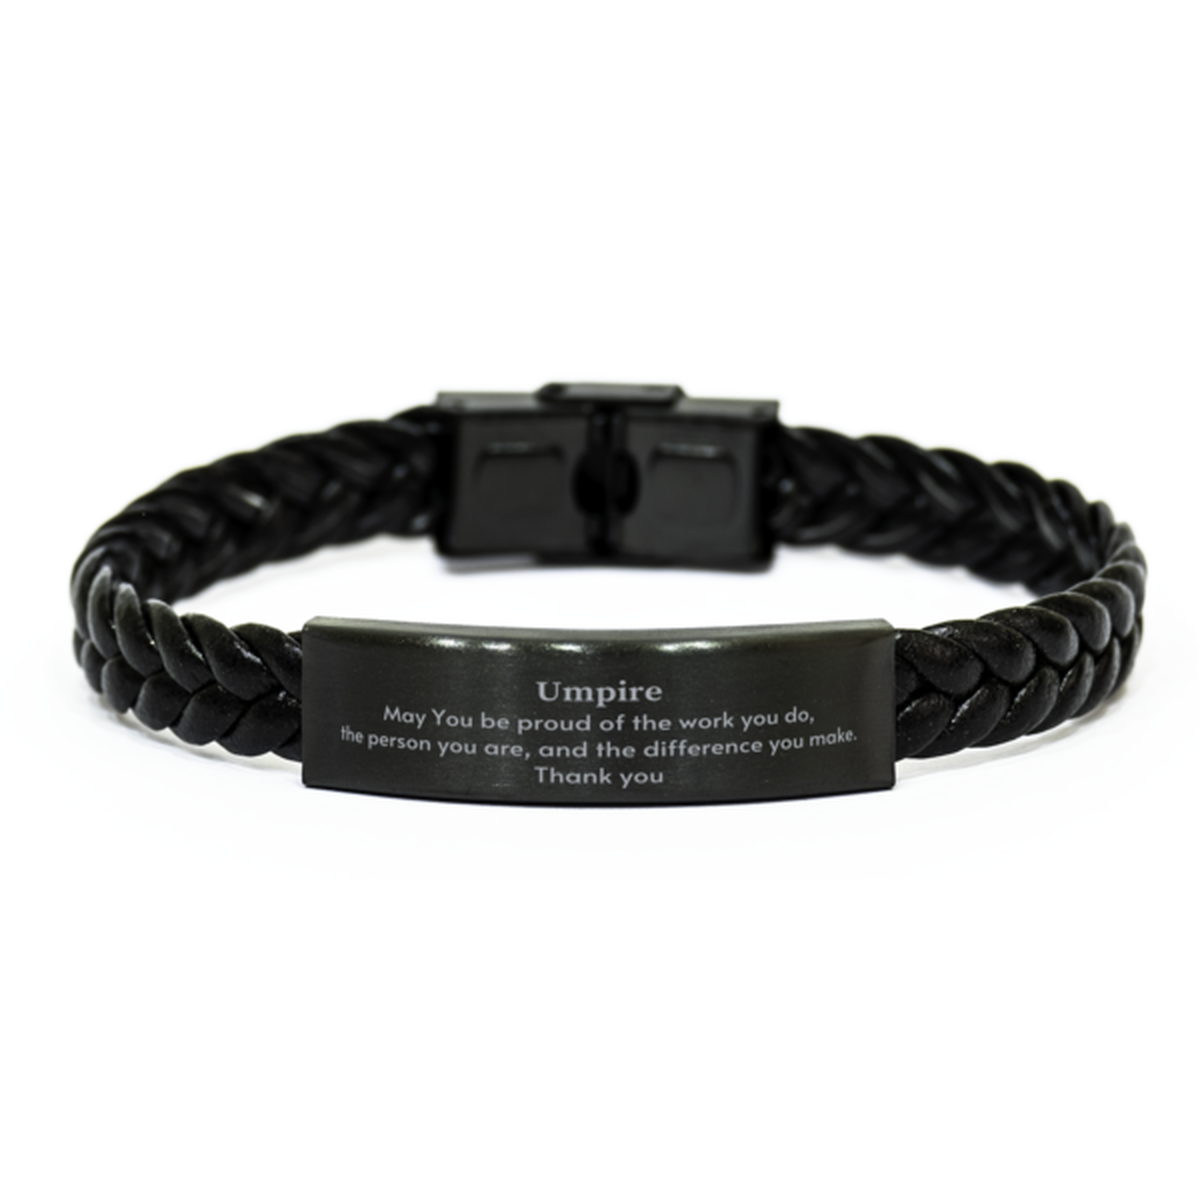 Heartwarming Braided Leather Bracelet Retirement Coworkers Gifts for Umpire, Umpire May You be proud of the work you do, the person you are Gifts for Boss Men Women Friends